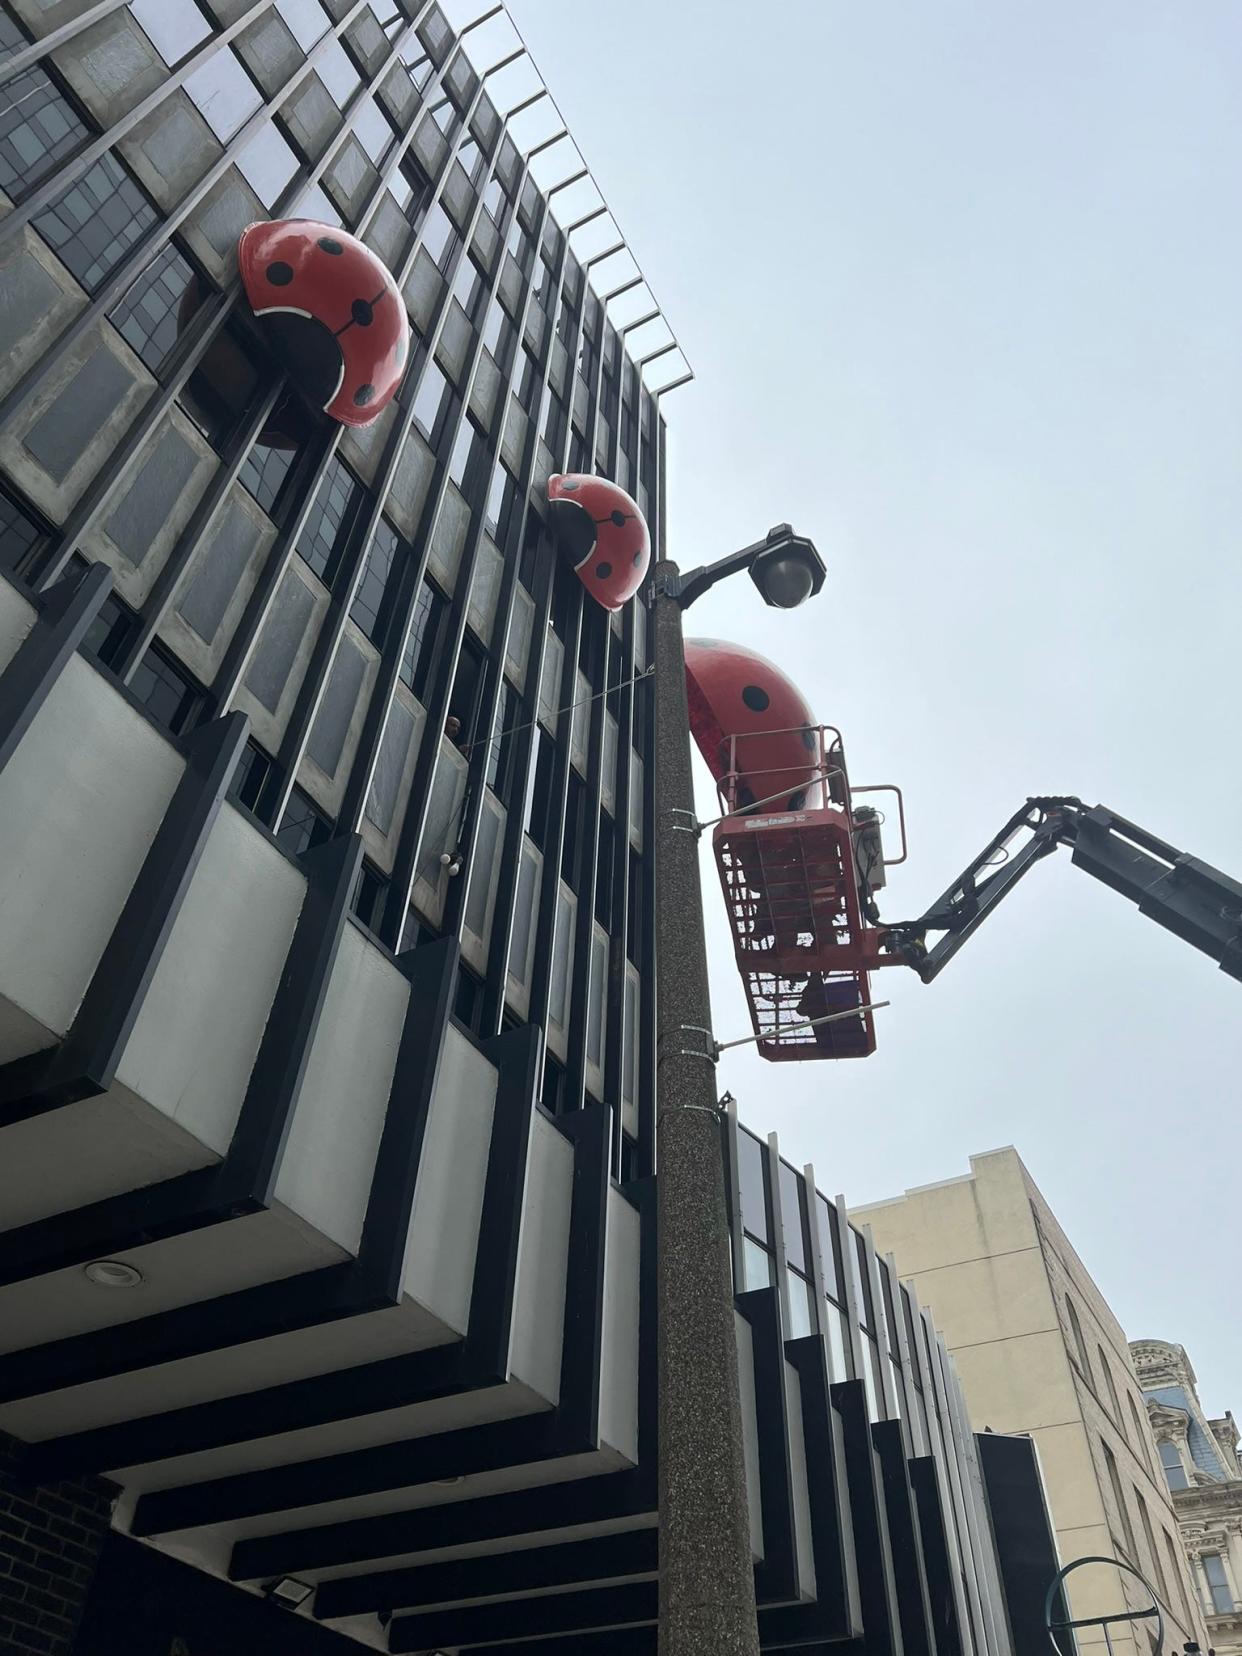 The three popular ladybugs were removed from the side of the Milwaukee Building on April 4 to be refurbished. It prompted some in the city to worry what might be happening to them.